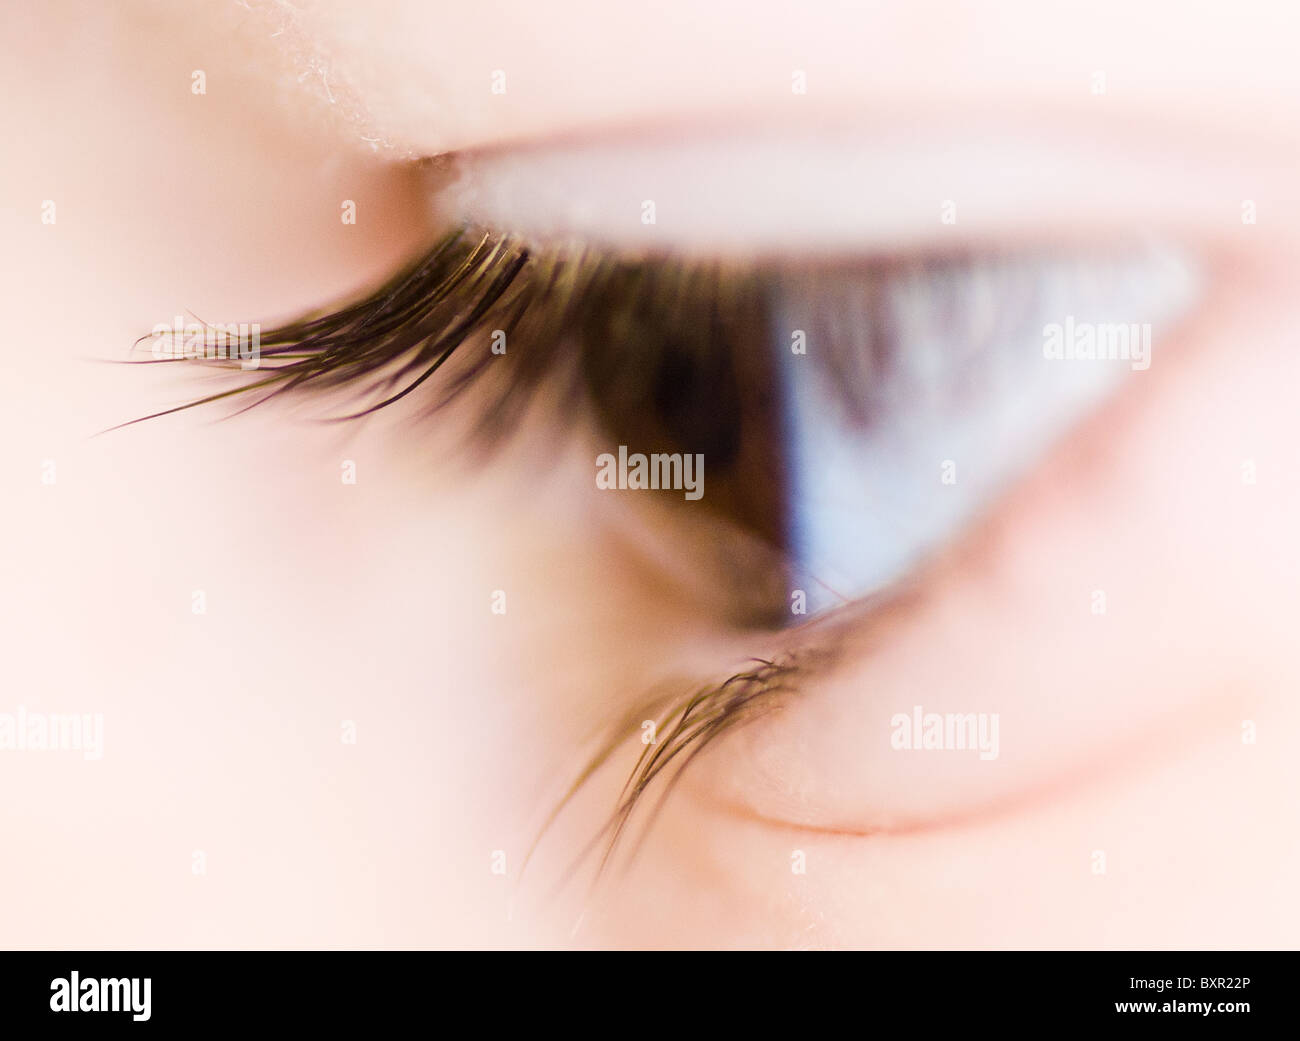 A close up side view of a child's eye Stock Photo